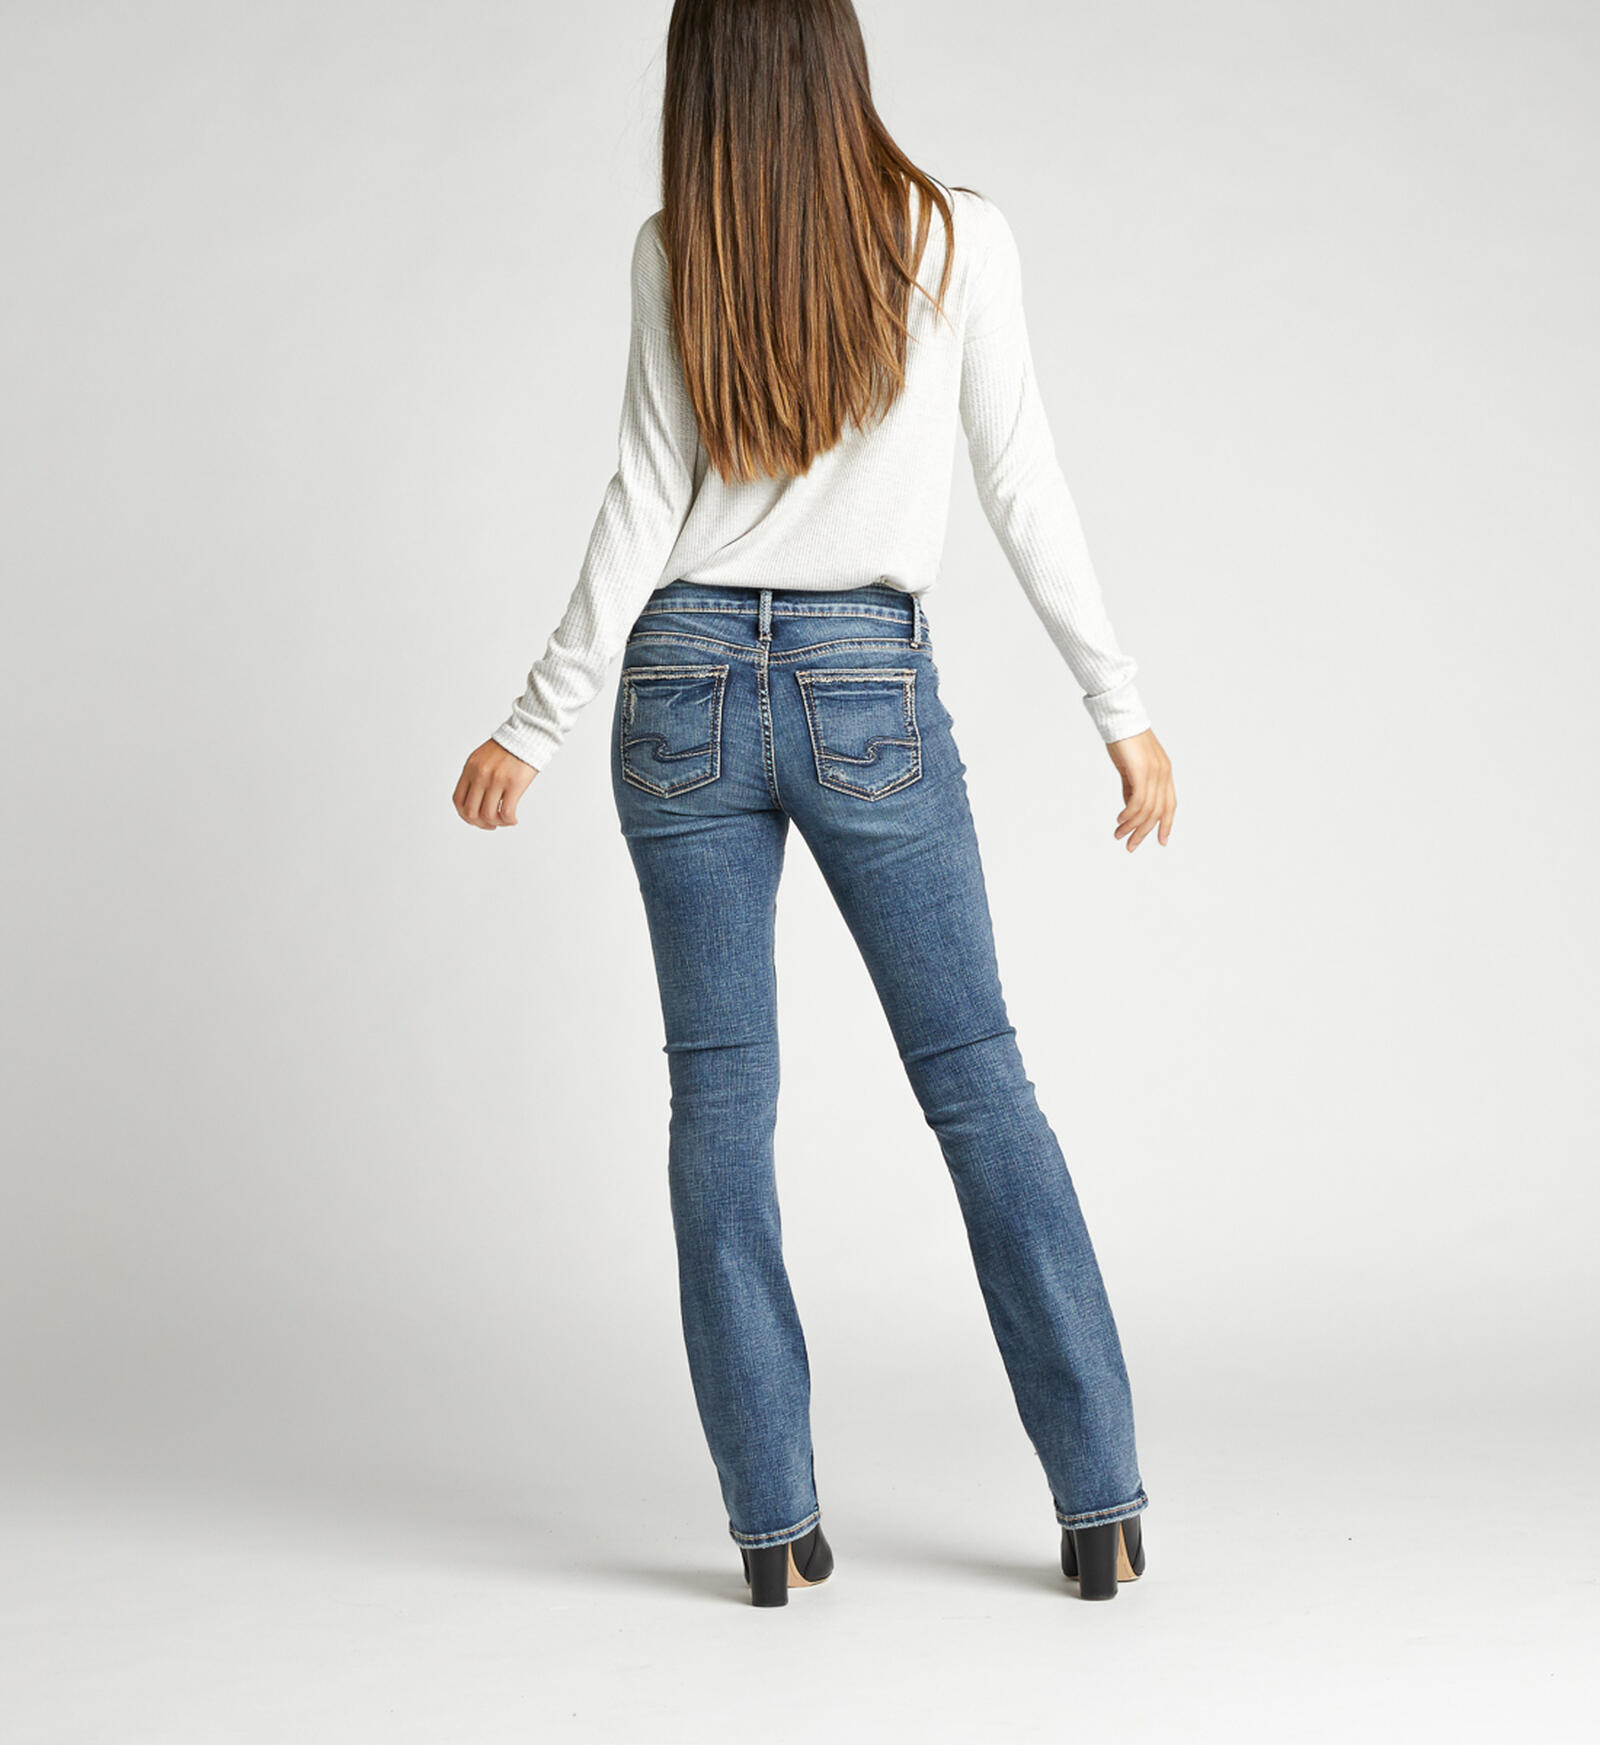 Buy Elyse Mid Rise Slim Bootcut Jeans Plus Size for CAD 108.00